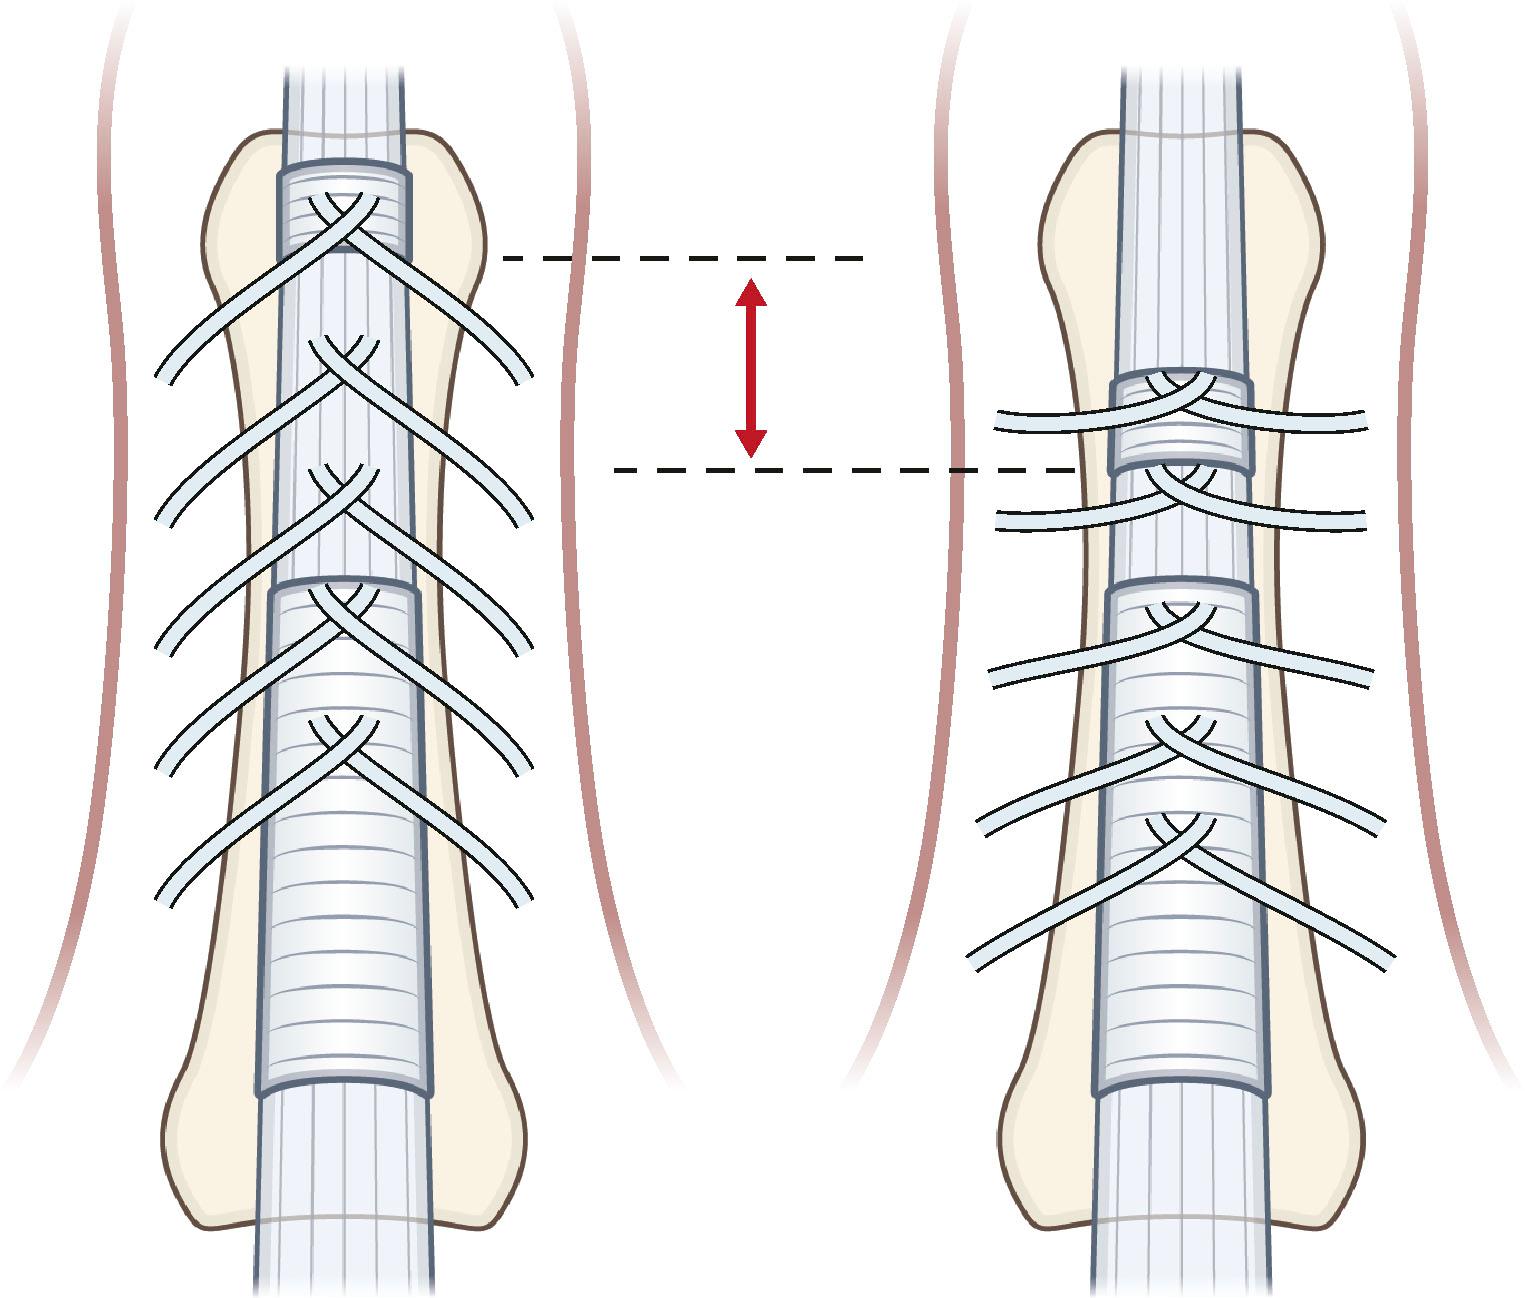 Figure 17.17, The orientation of the most condensed part of a trabecular network of fibers that is located volar to the neurovascular bundle. It consists of fibers that originate from the outside of the flexor tendon sheet and end more proximally on the contralateral side of the finger, causing an inverted V-shaped orientation, which becomes less pointed during flexion.